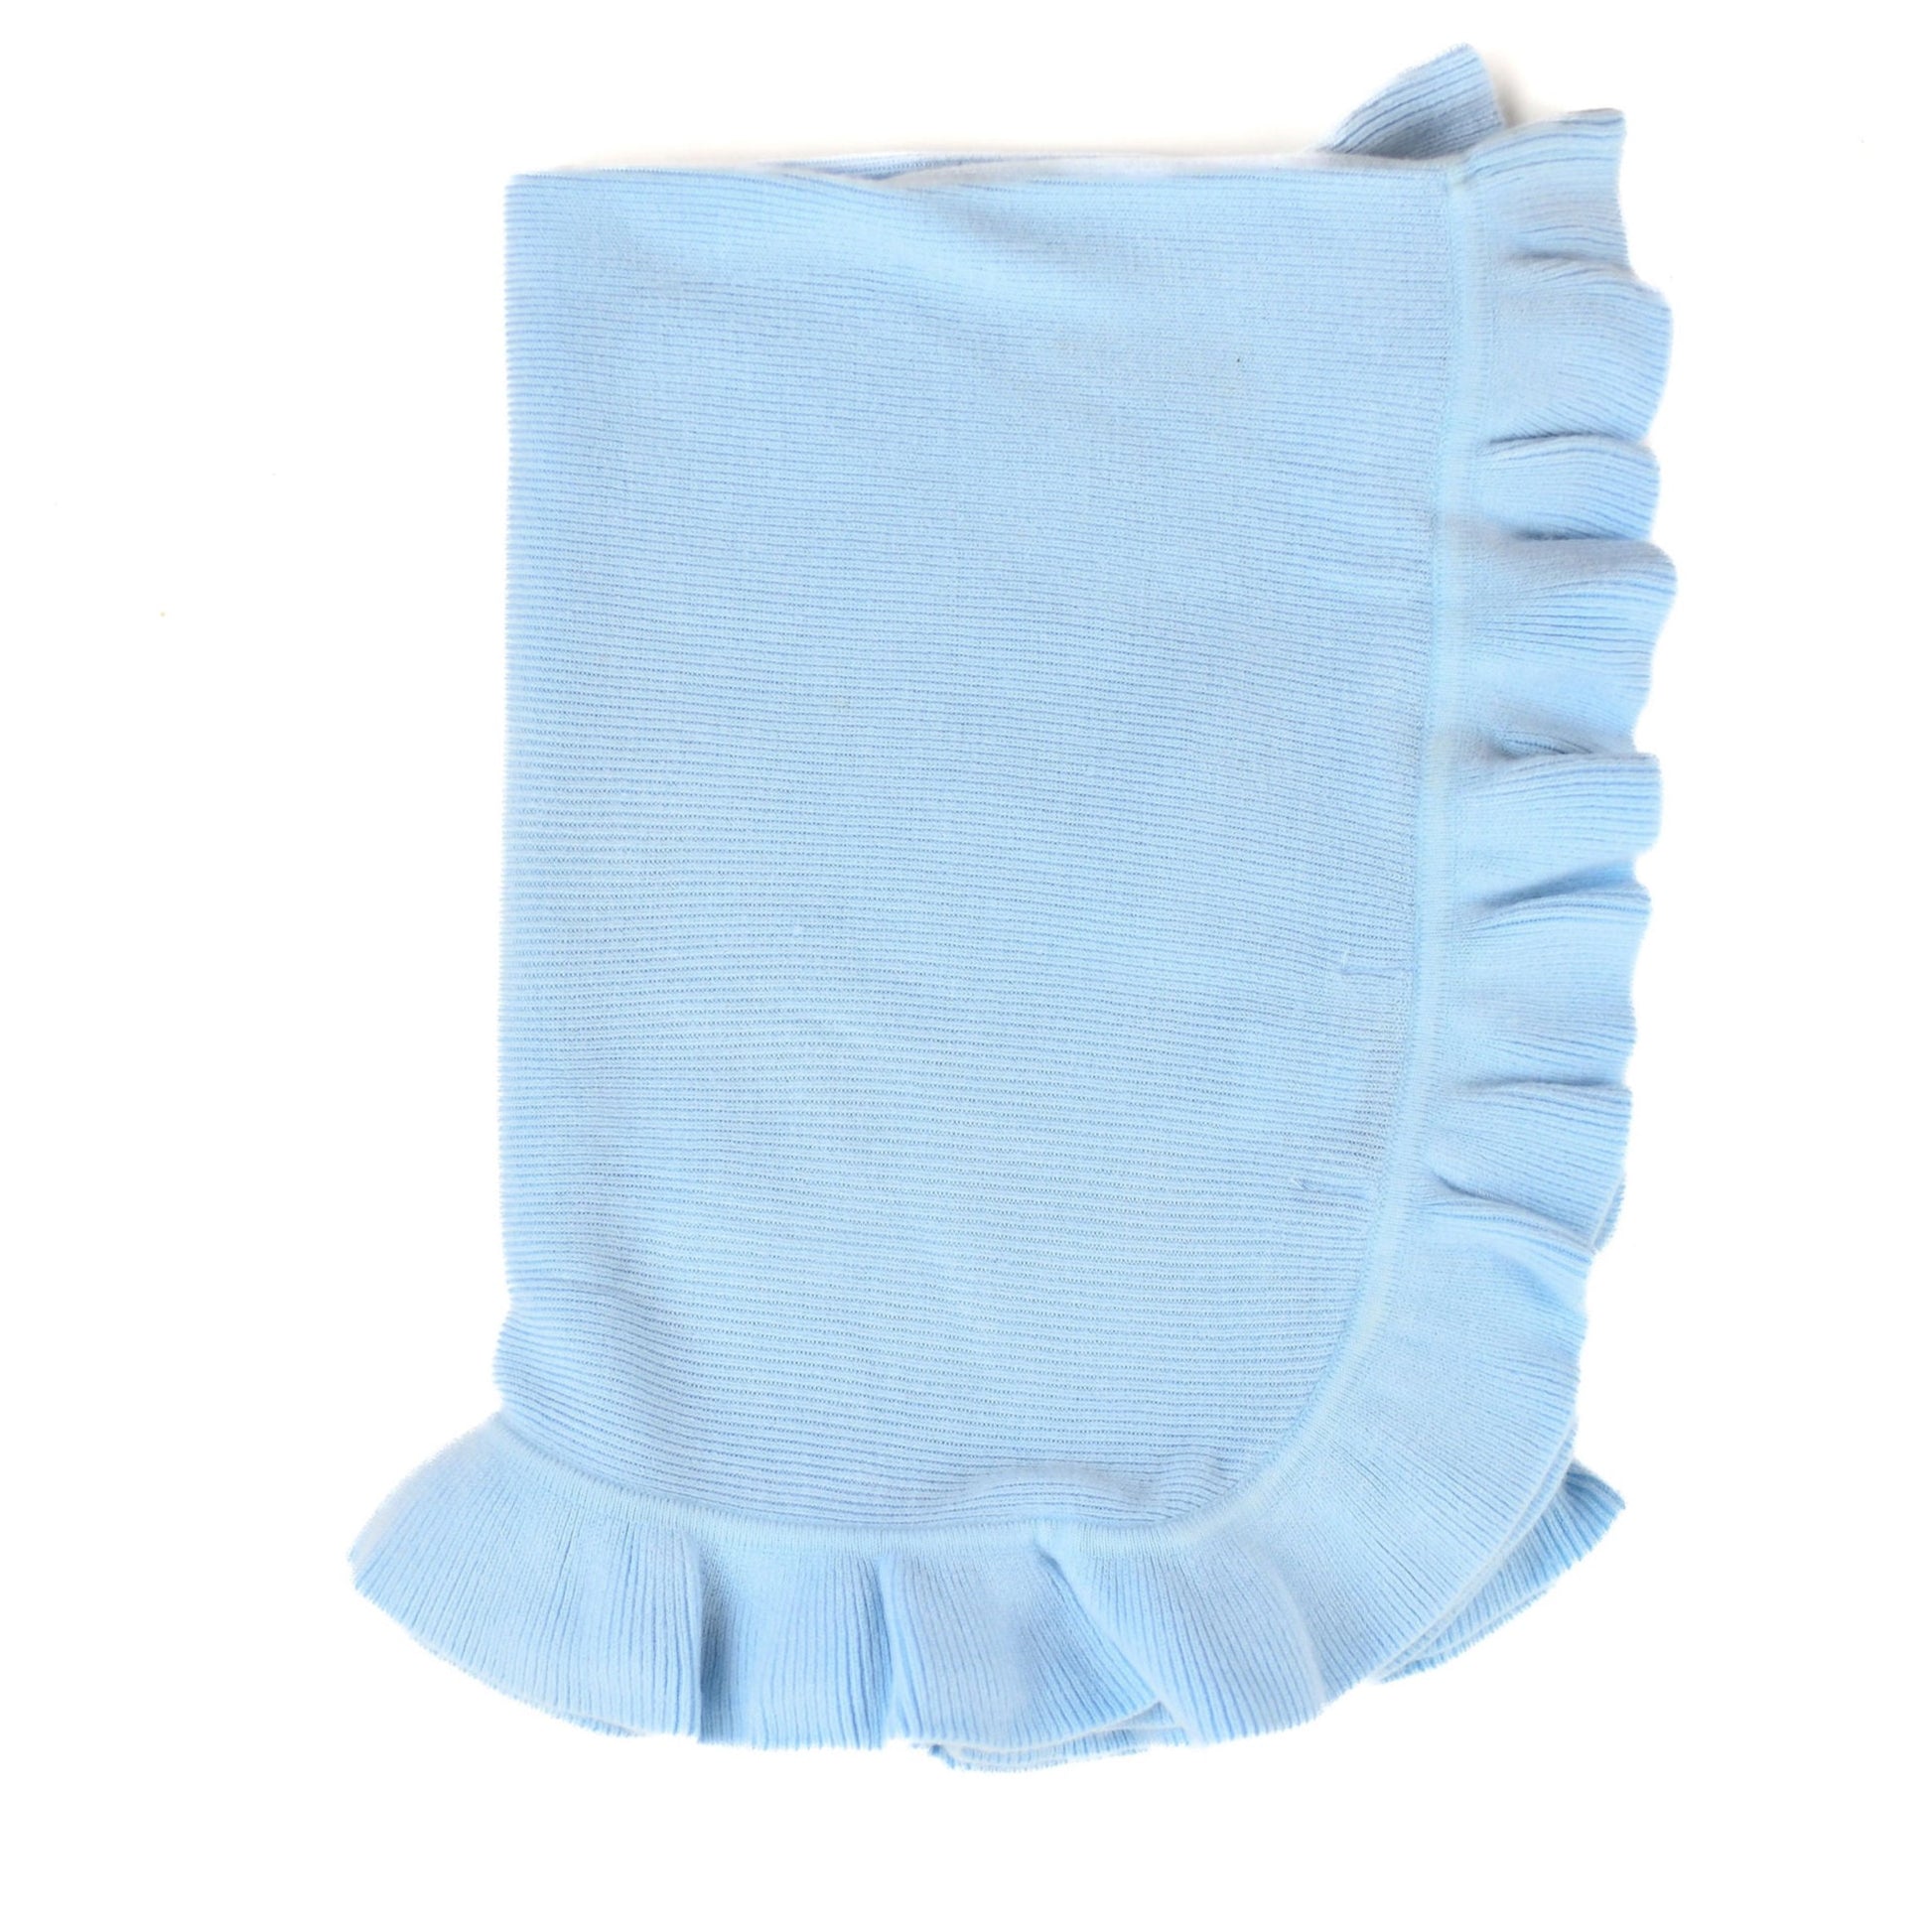 Cashmere like Jersey Knit Ruffle Blanket made by A Soft Idea.